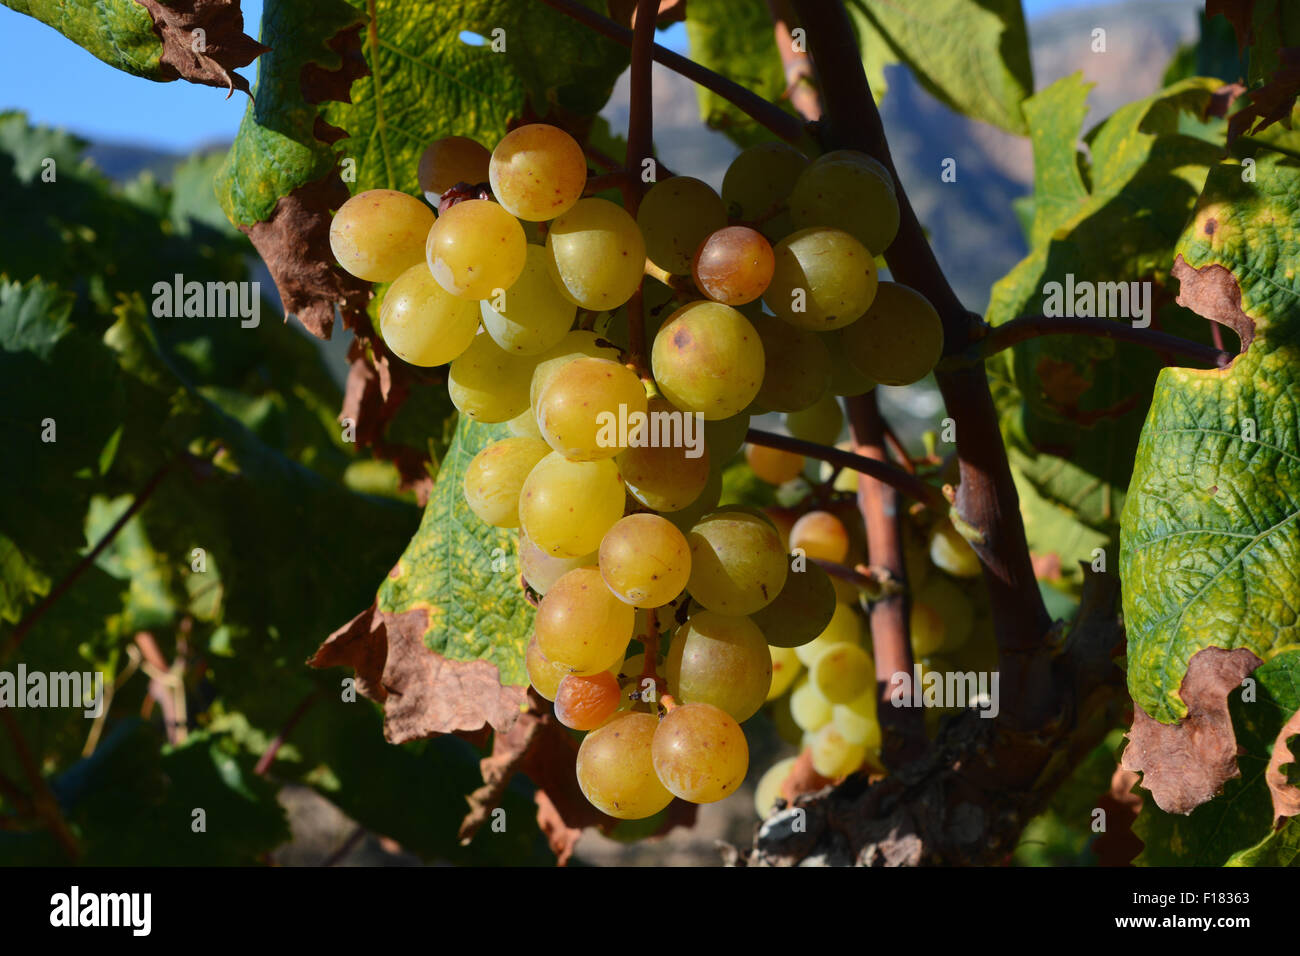 Muscat grapes growing on the vine in a vineyard between Gata de Gorgos and Javea on the Costa Blanca. Stock Photo